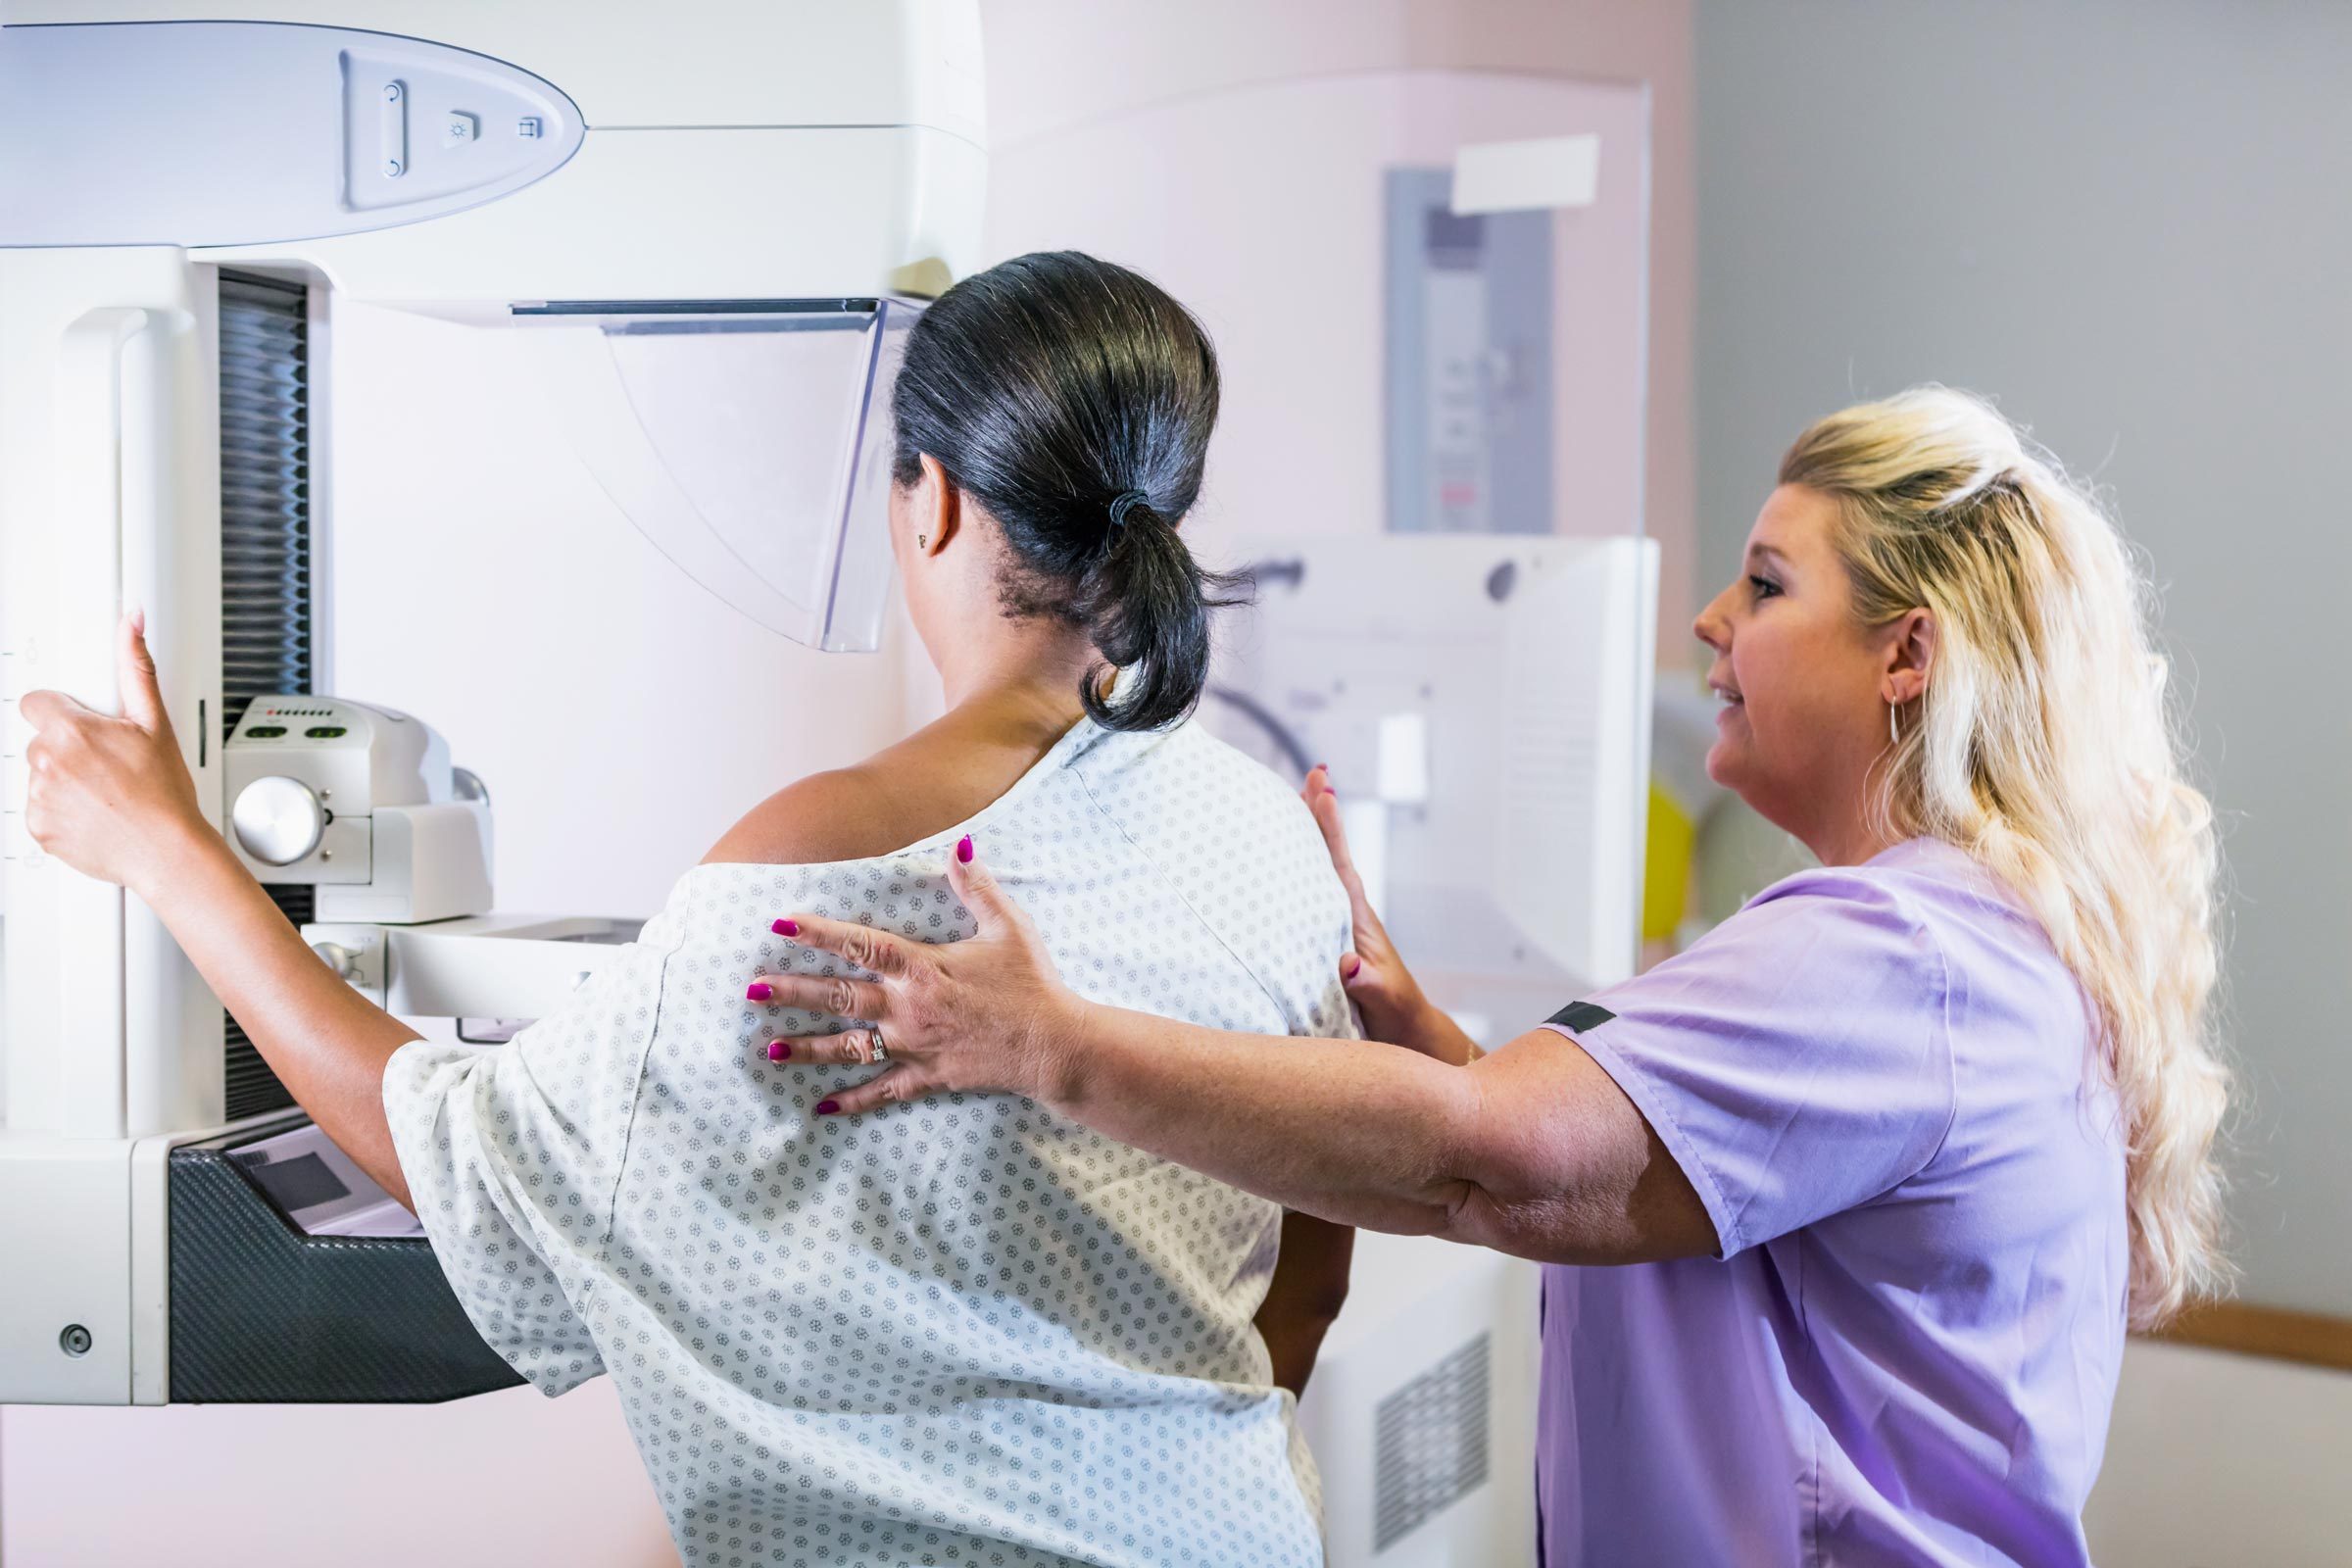 Doctors Share What to Know About the New Changes for Breast Cancer Screenings